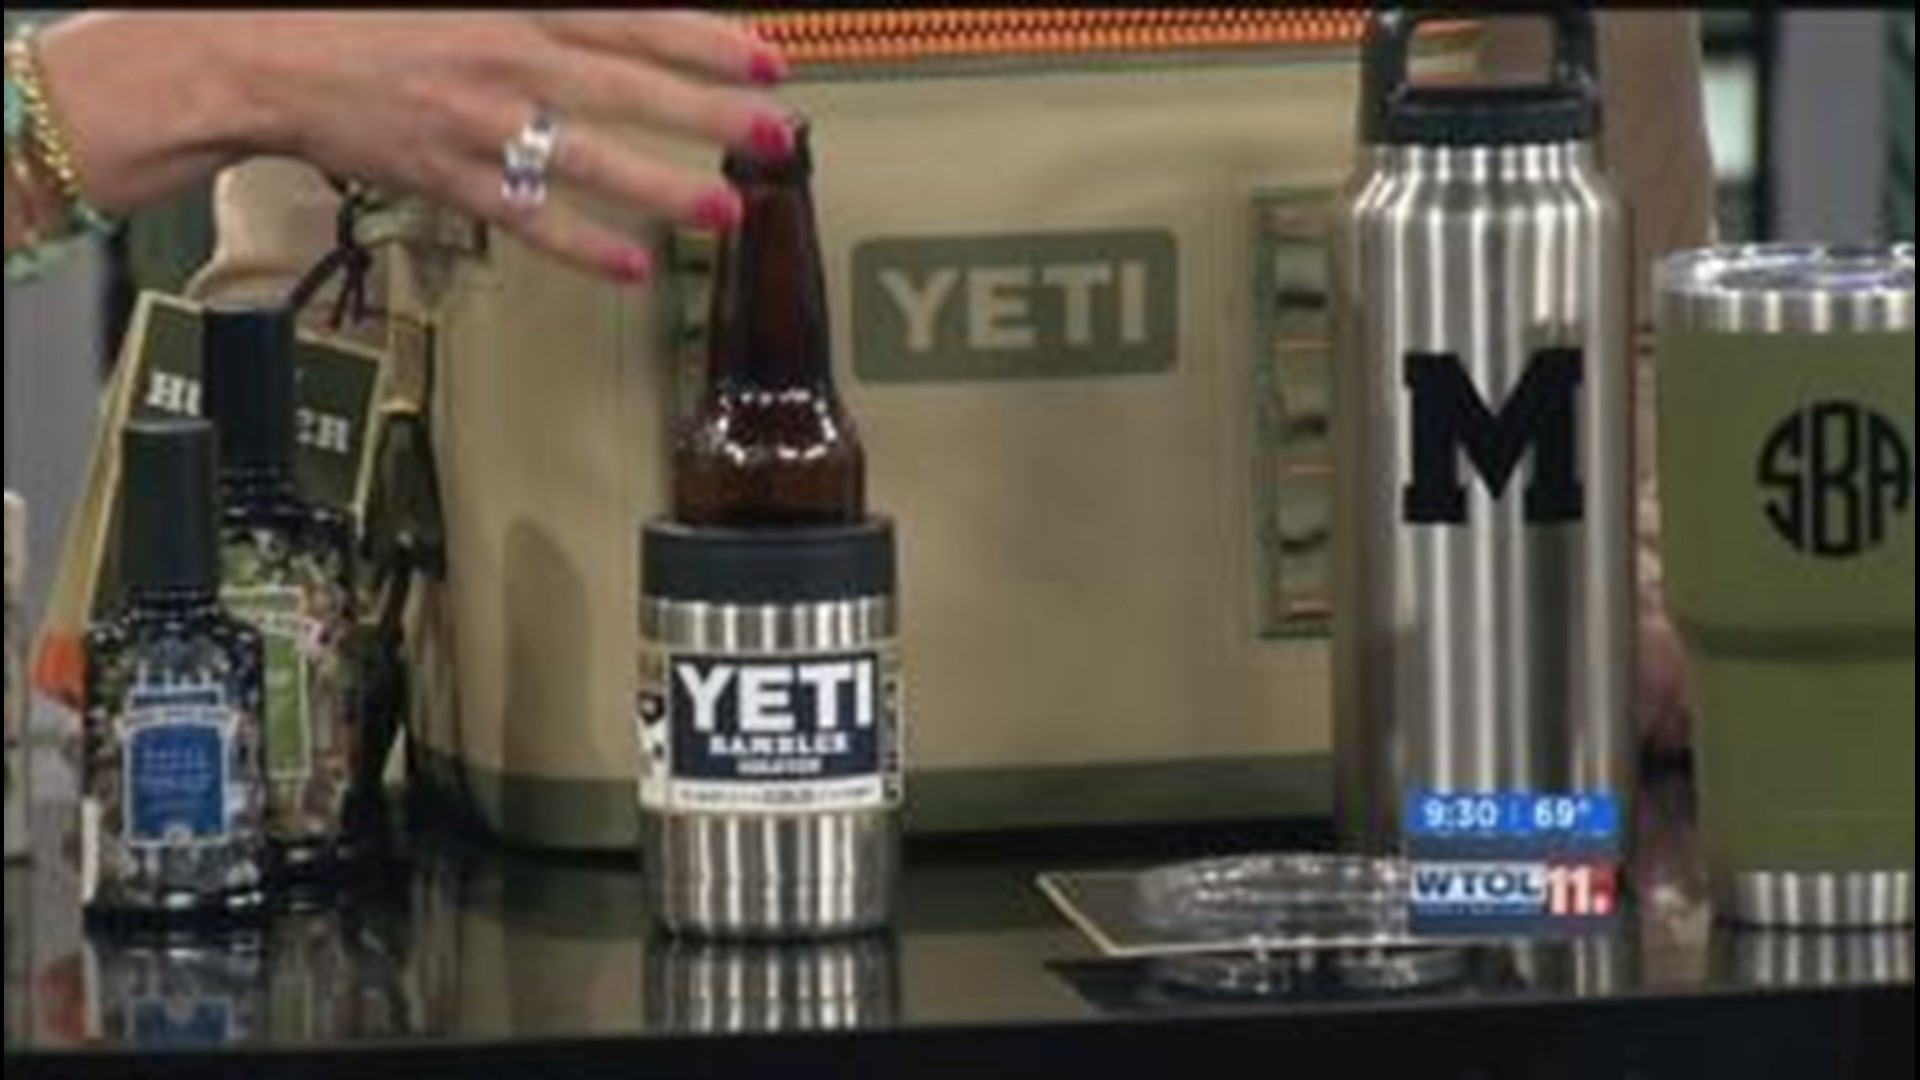 Fiddle Stix brings Father's Day ideas on WTOL 11 Your Day